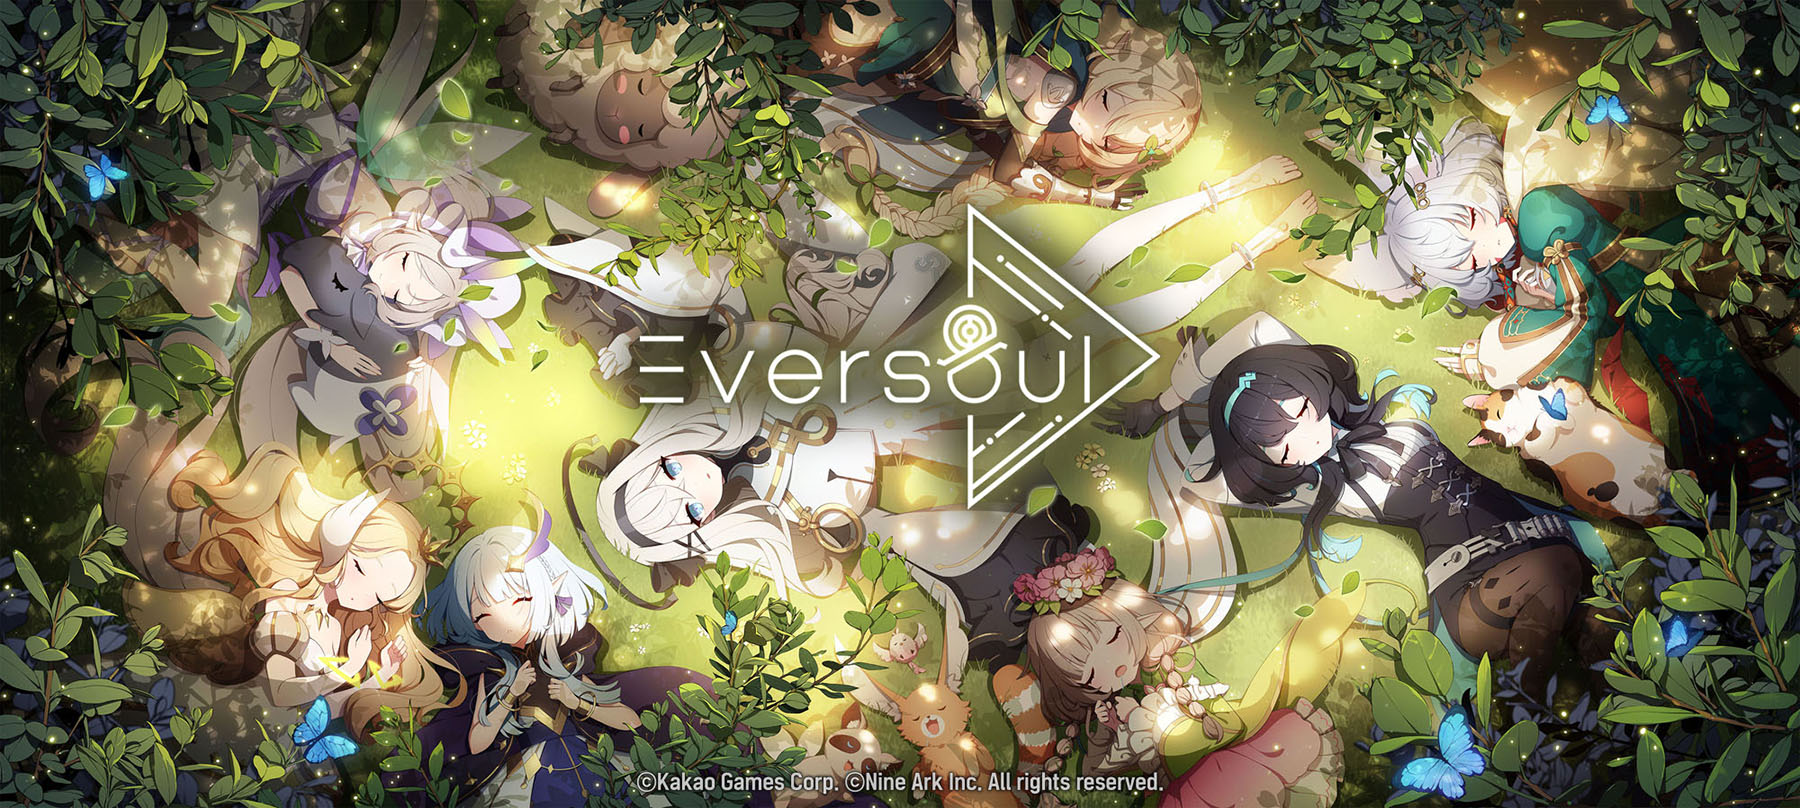 Eversoulキービジュアル